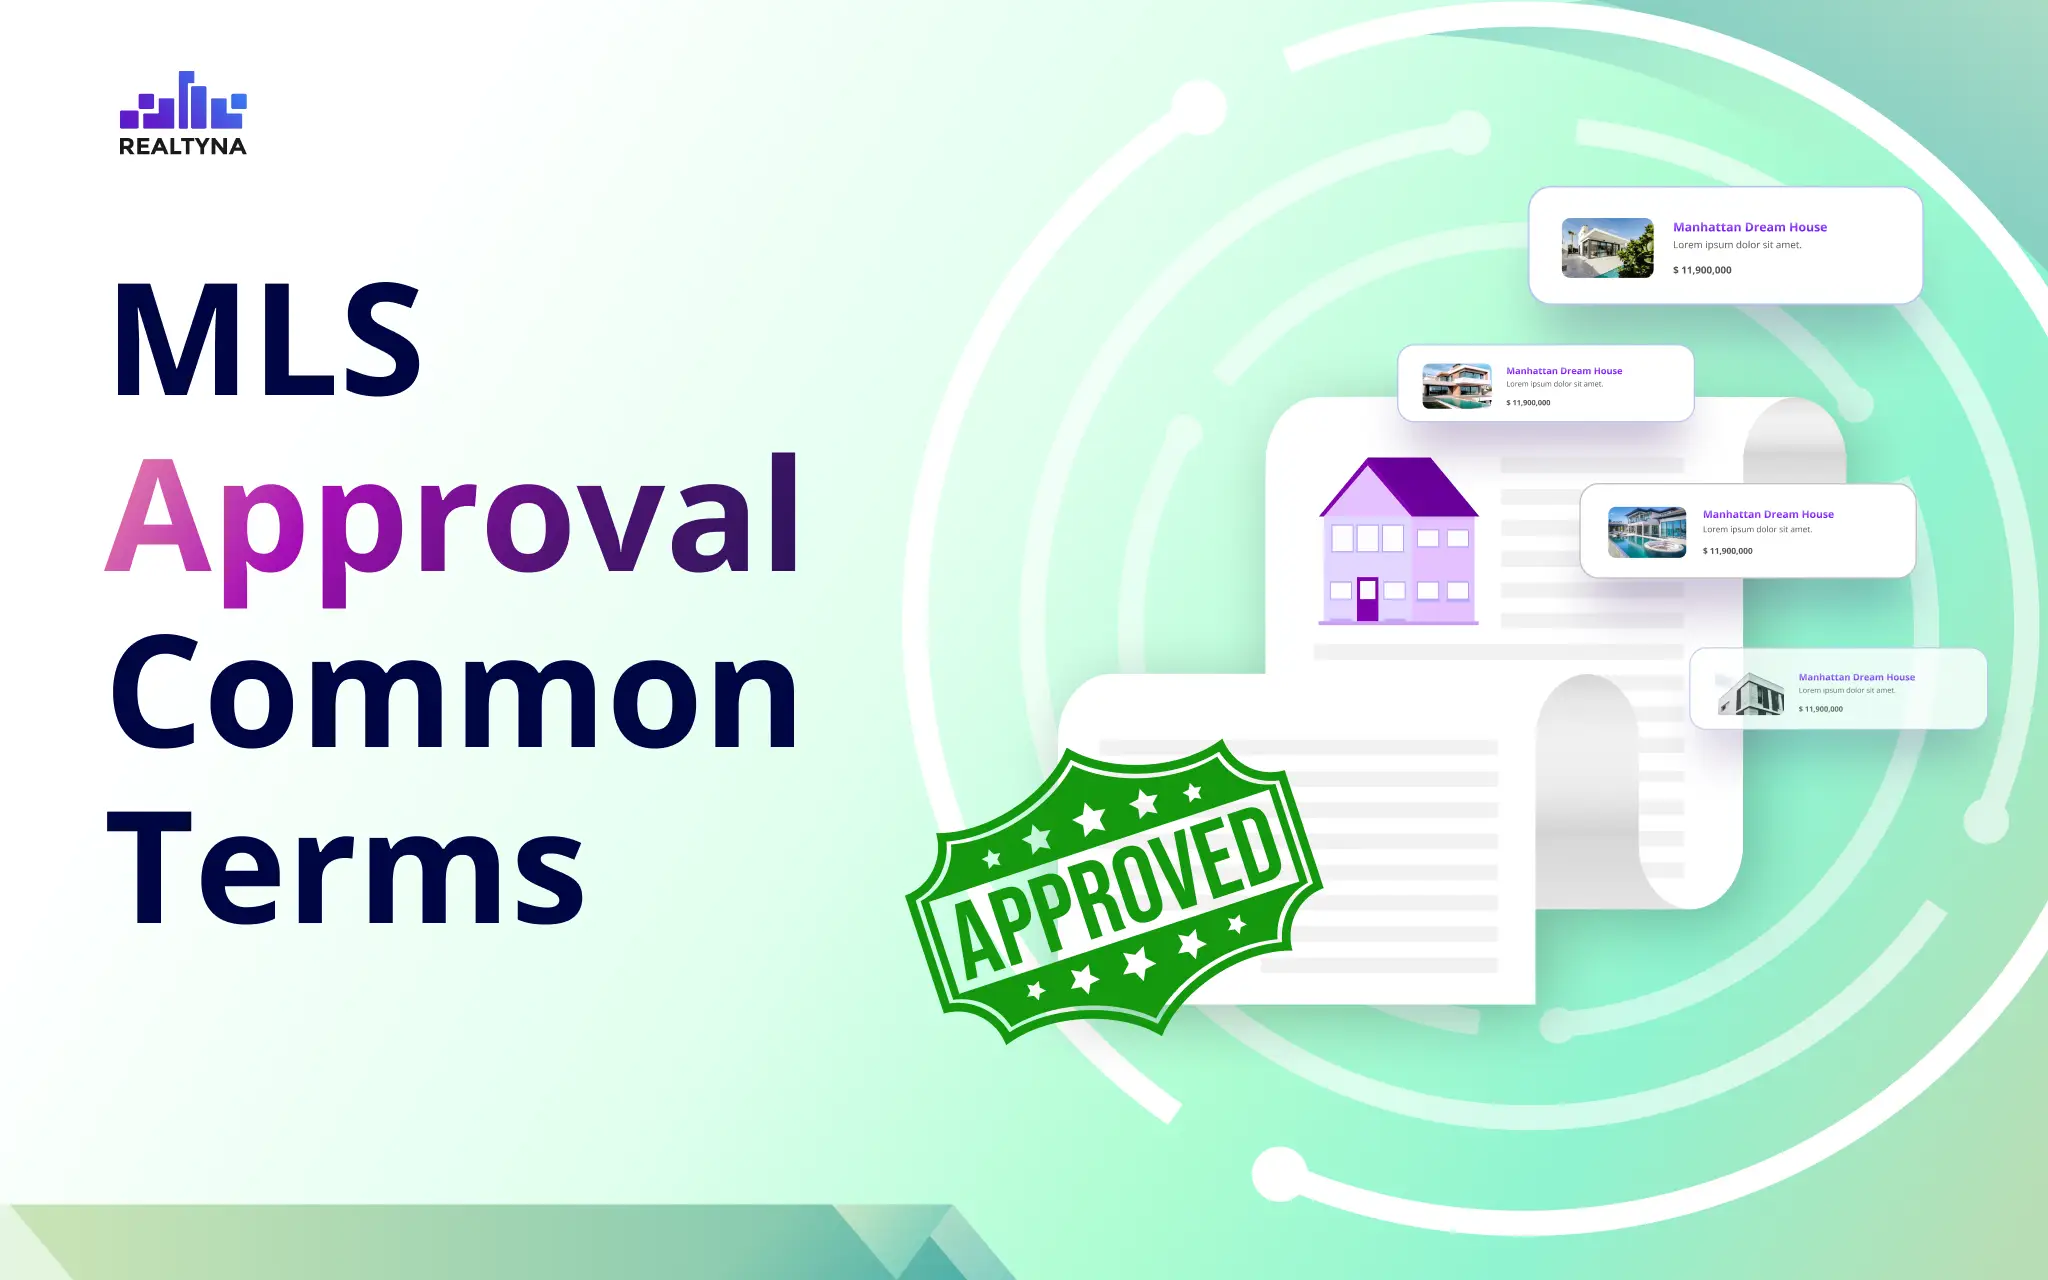 MLS Approval Common Terms